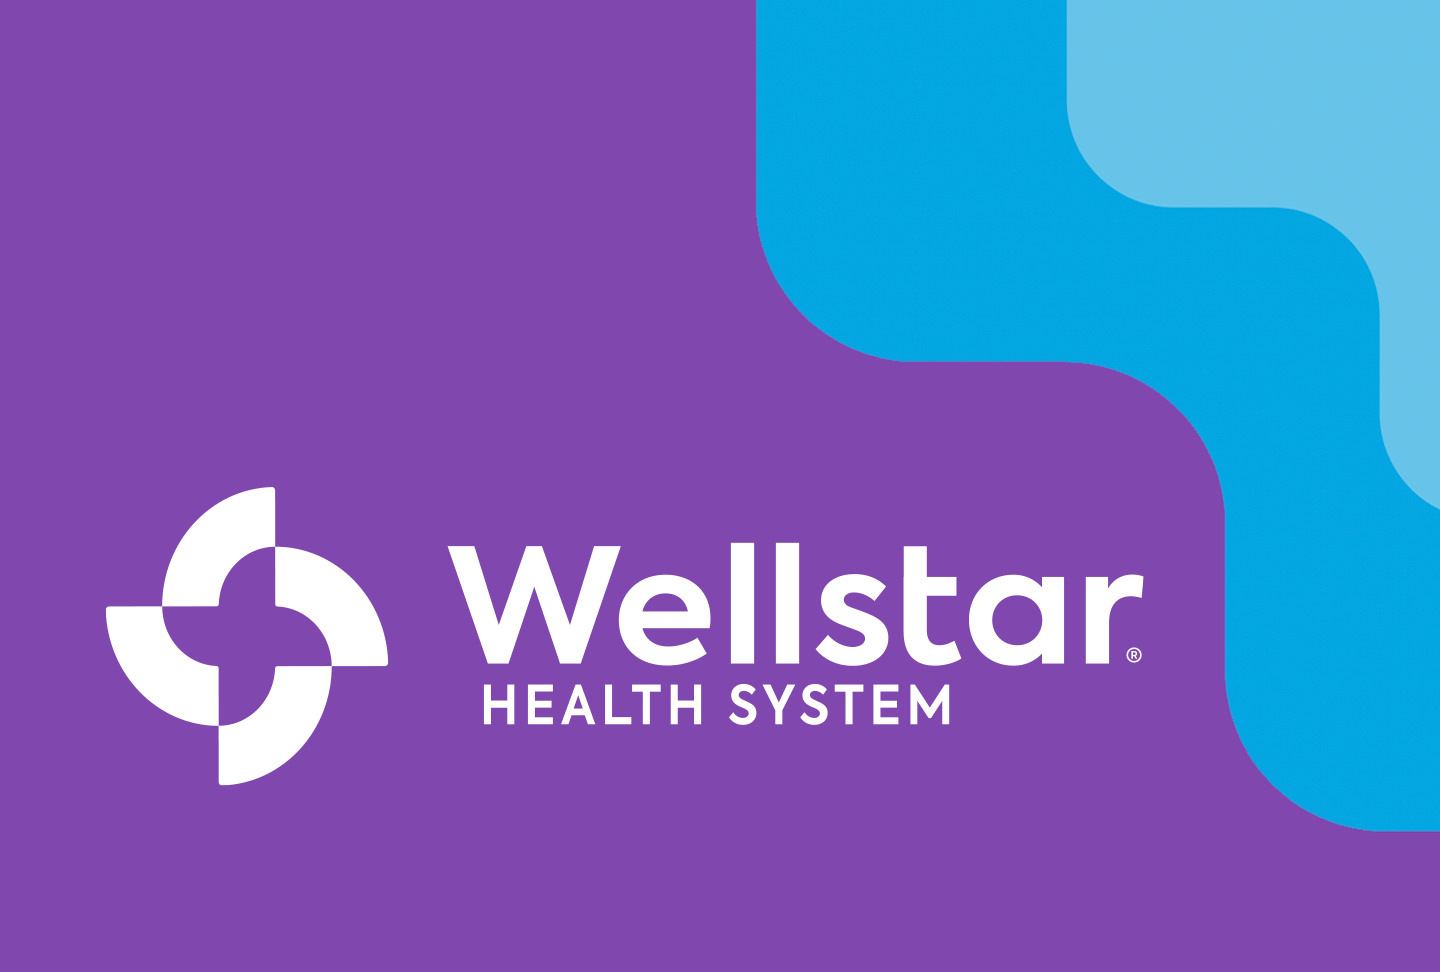 Wellstar Moving Forward with New Branding Image